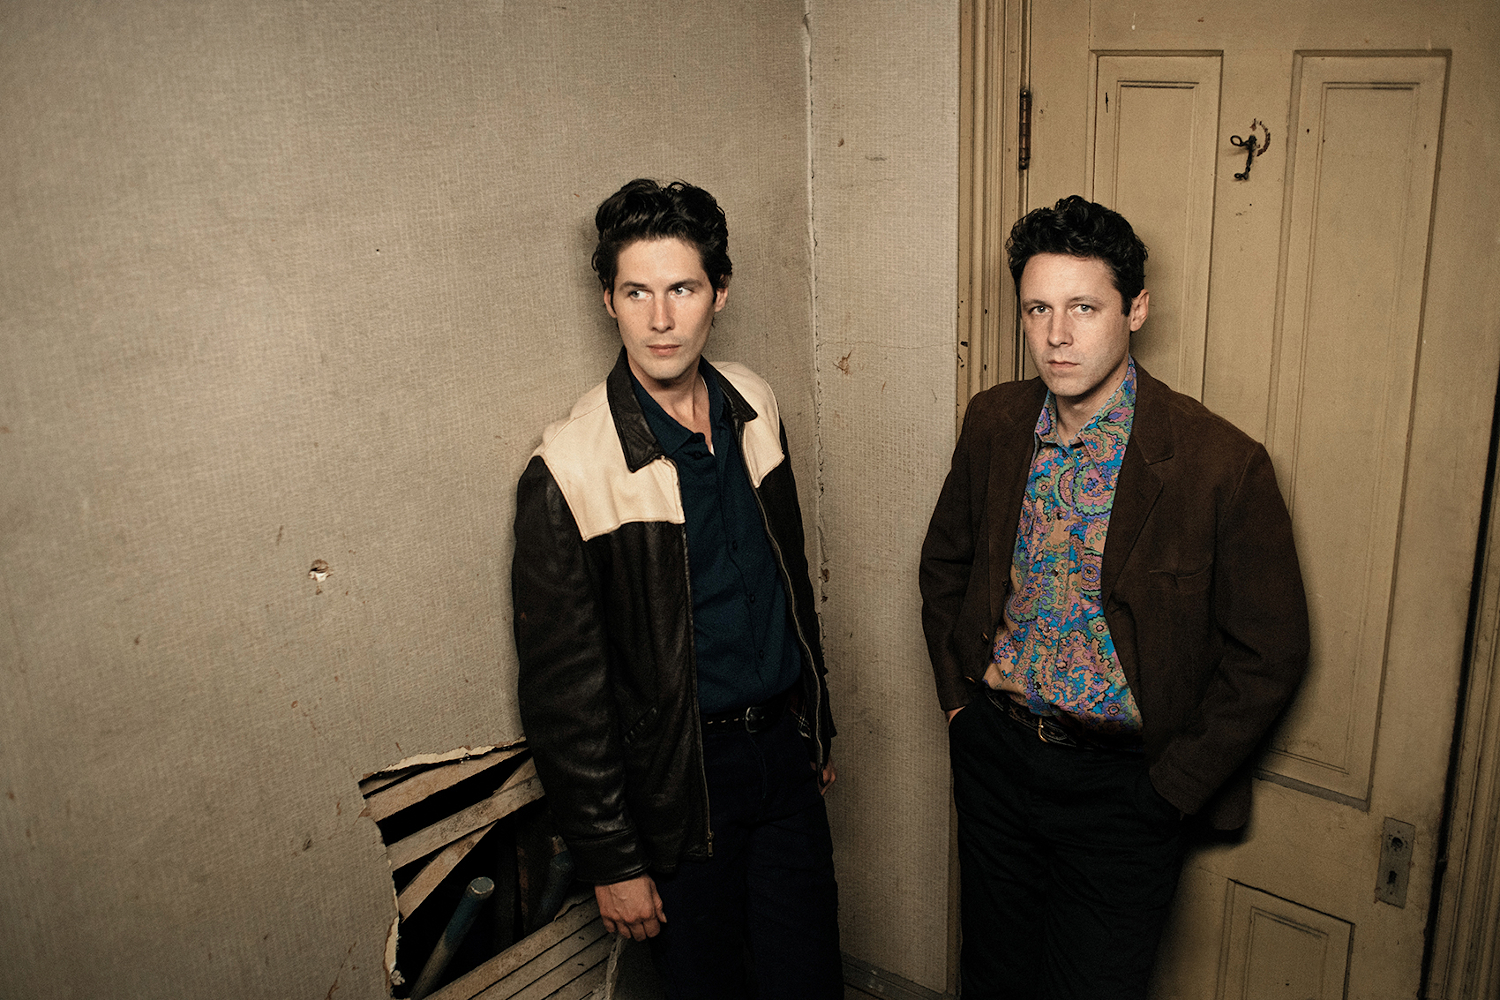 The Cactus Blossoms bring "Easy Way" to Europe starting next weekend